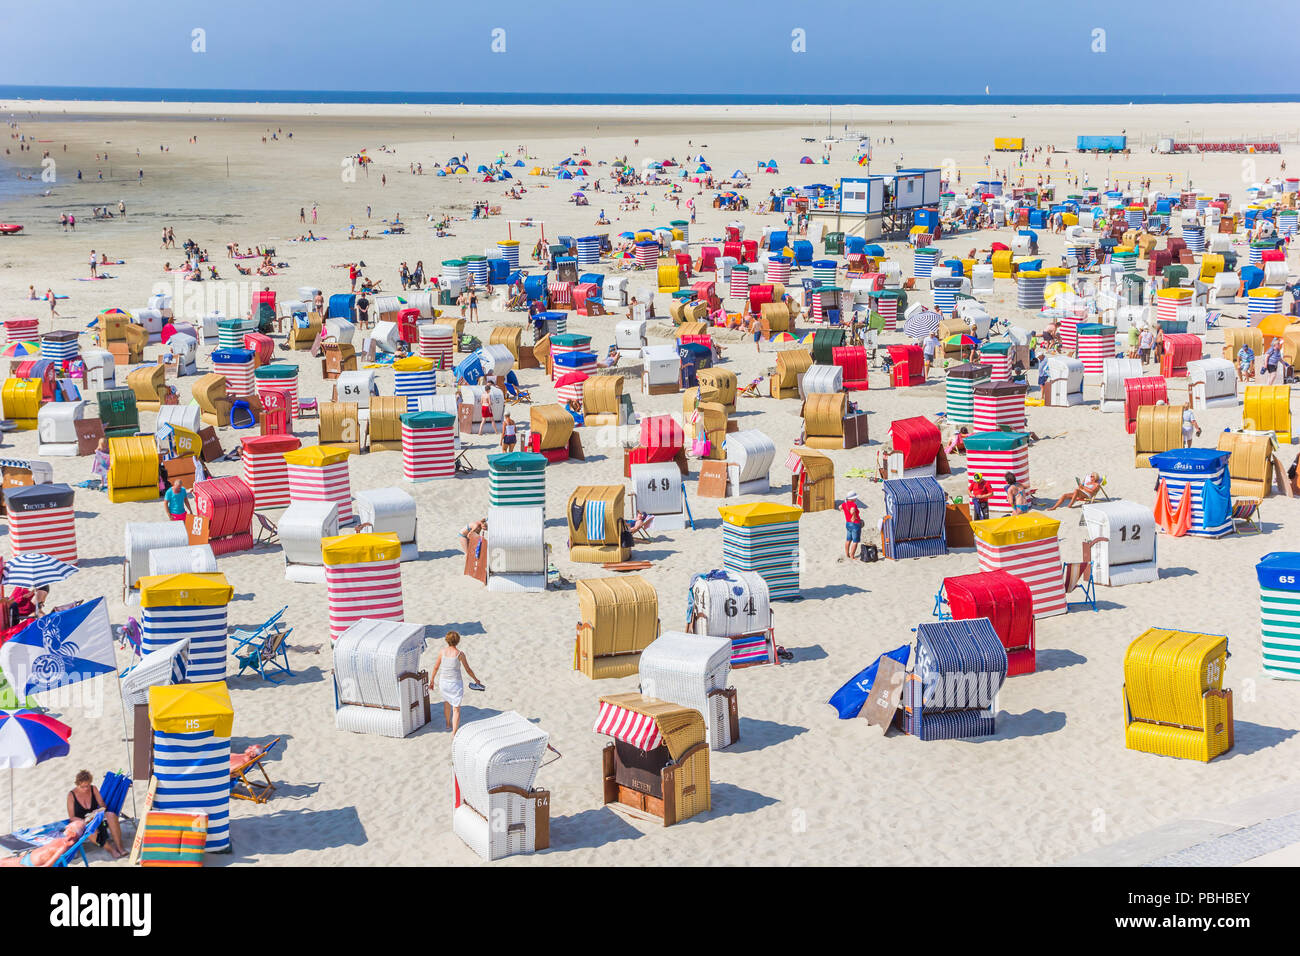 Many colorful tents and beach chairs on Borkum island in Germany Stock Photo